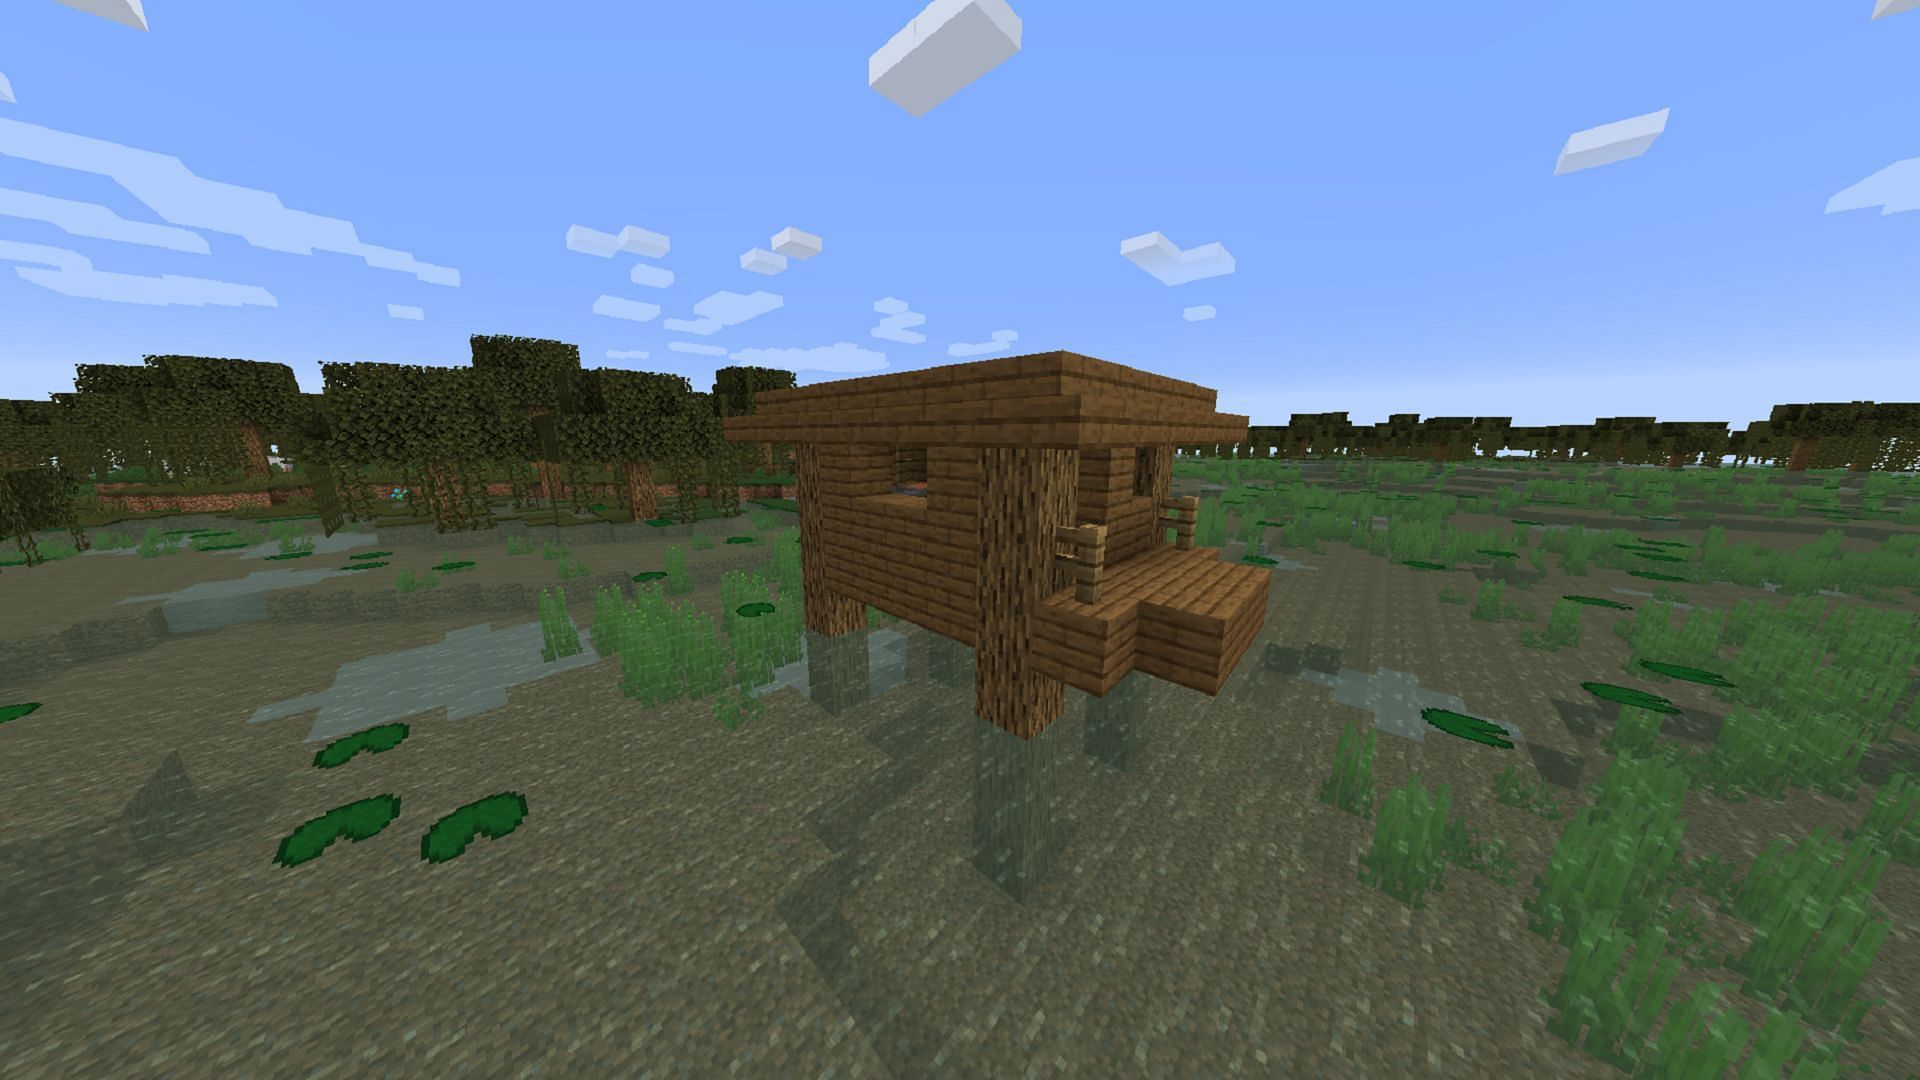 Swamp huts can be useful for farming witches, but not for exploration (Image via Mojang)